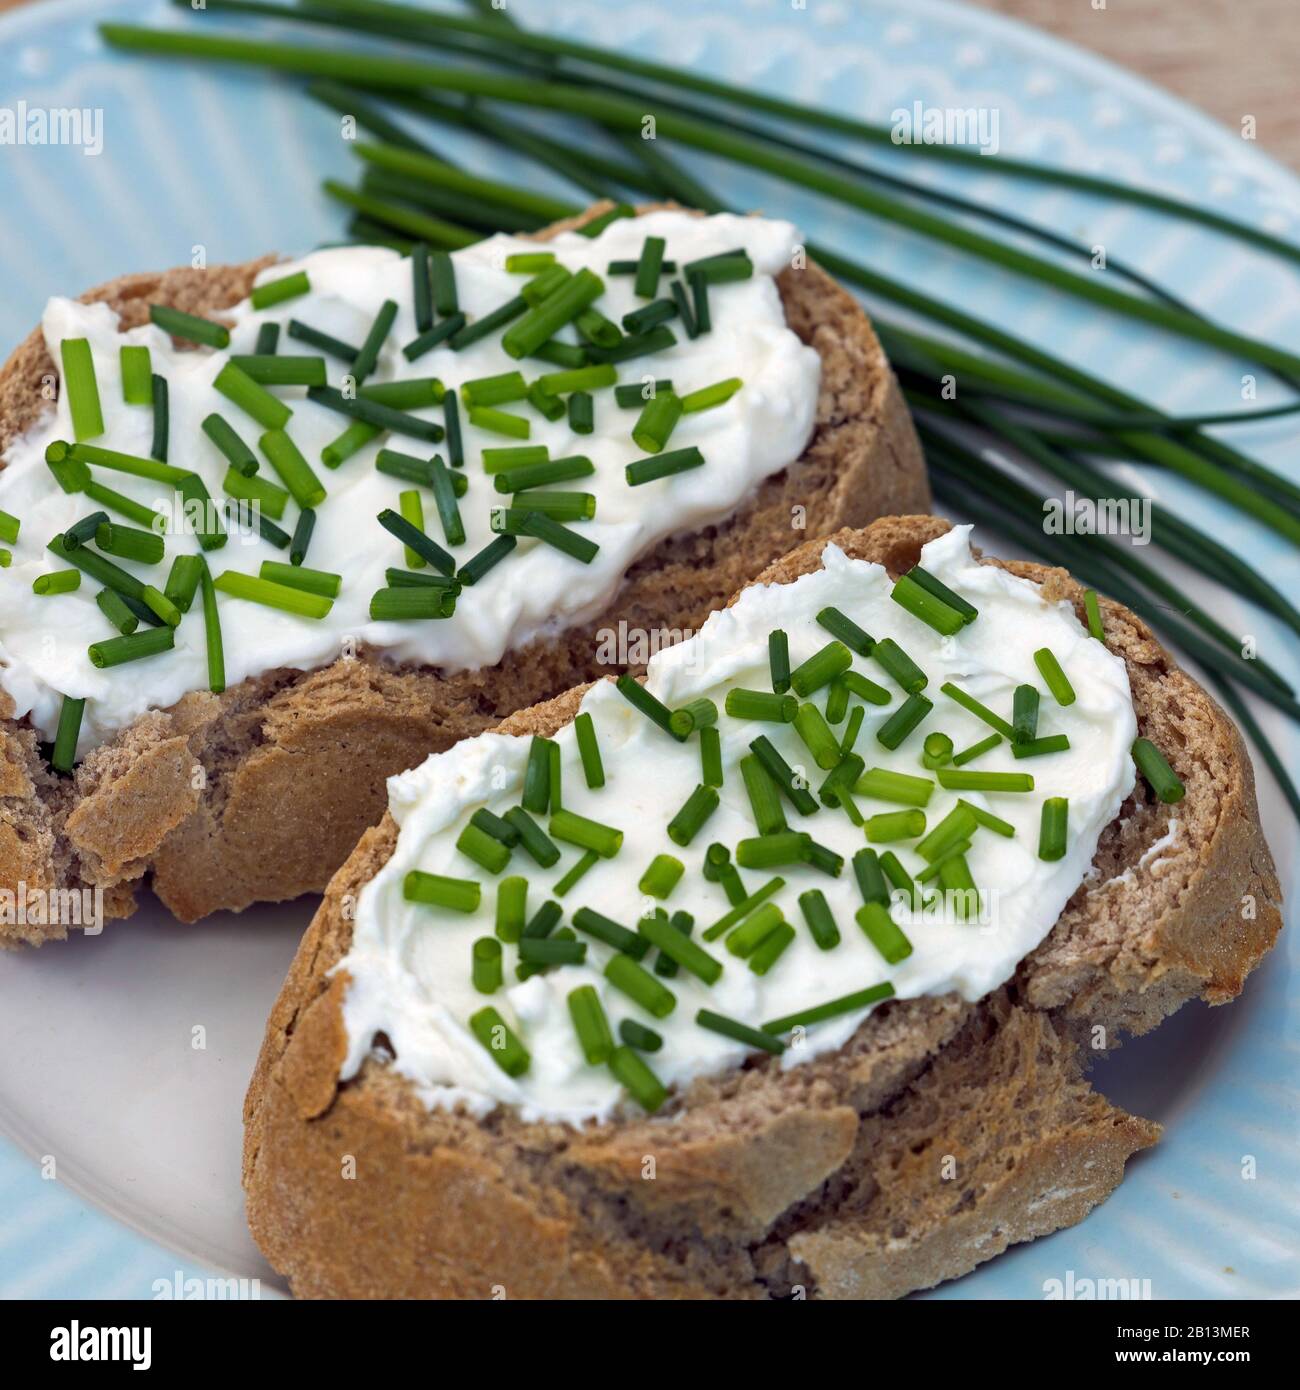 chives, sand leek (Allium schoenoprasum), slices of bread with curd and chives Stock Photo